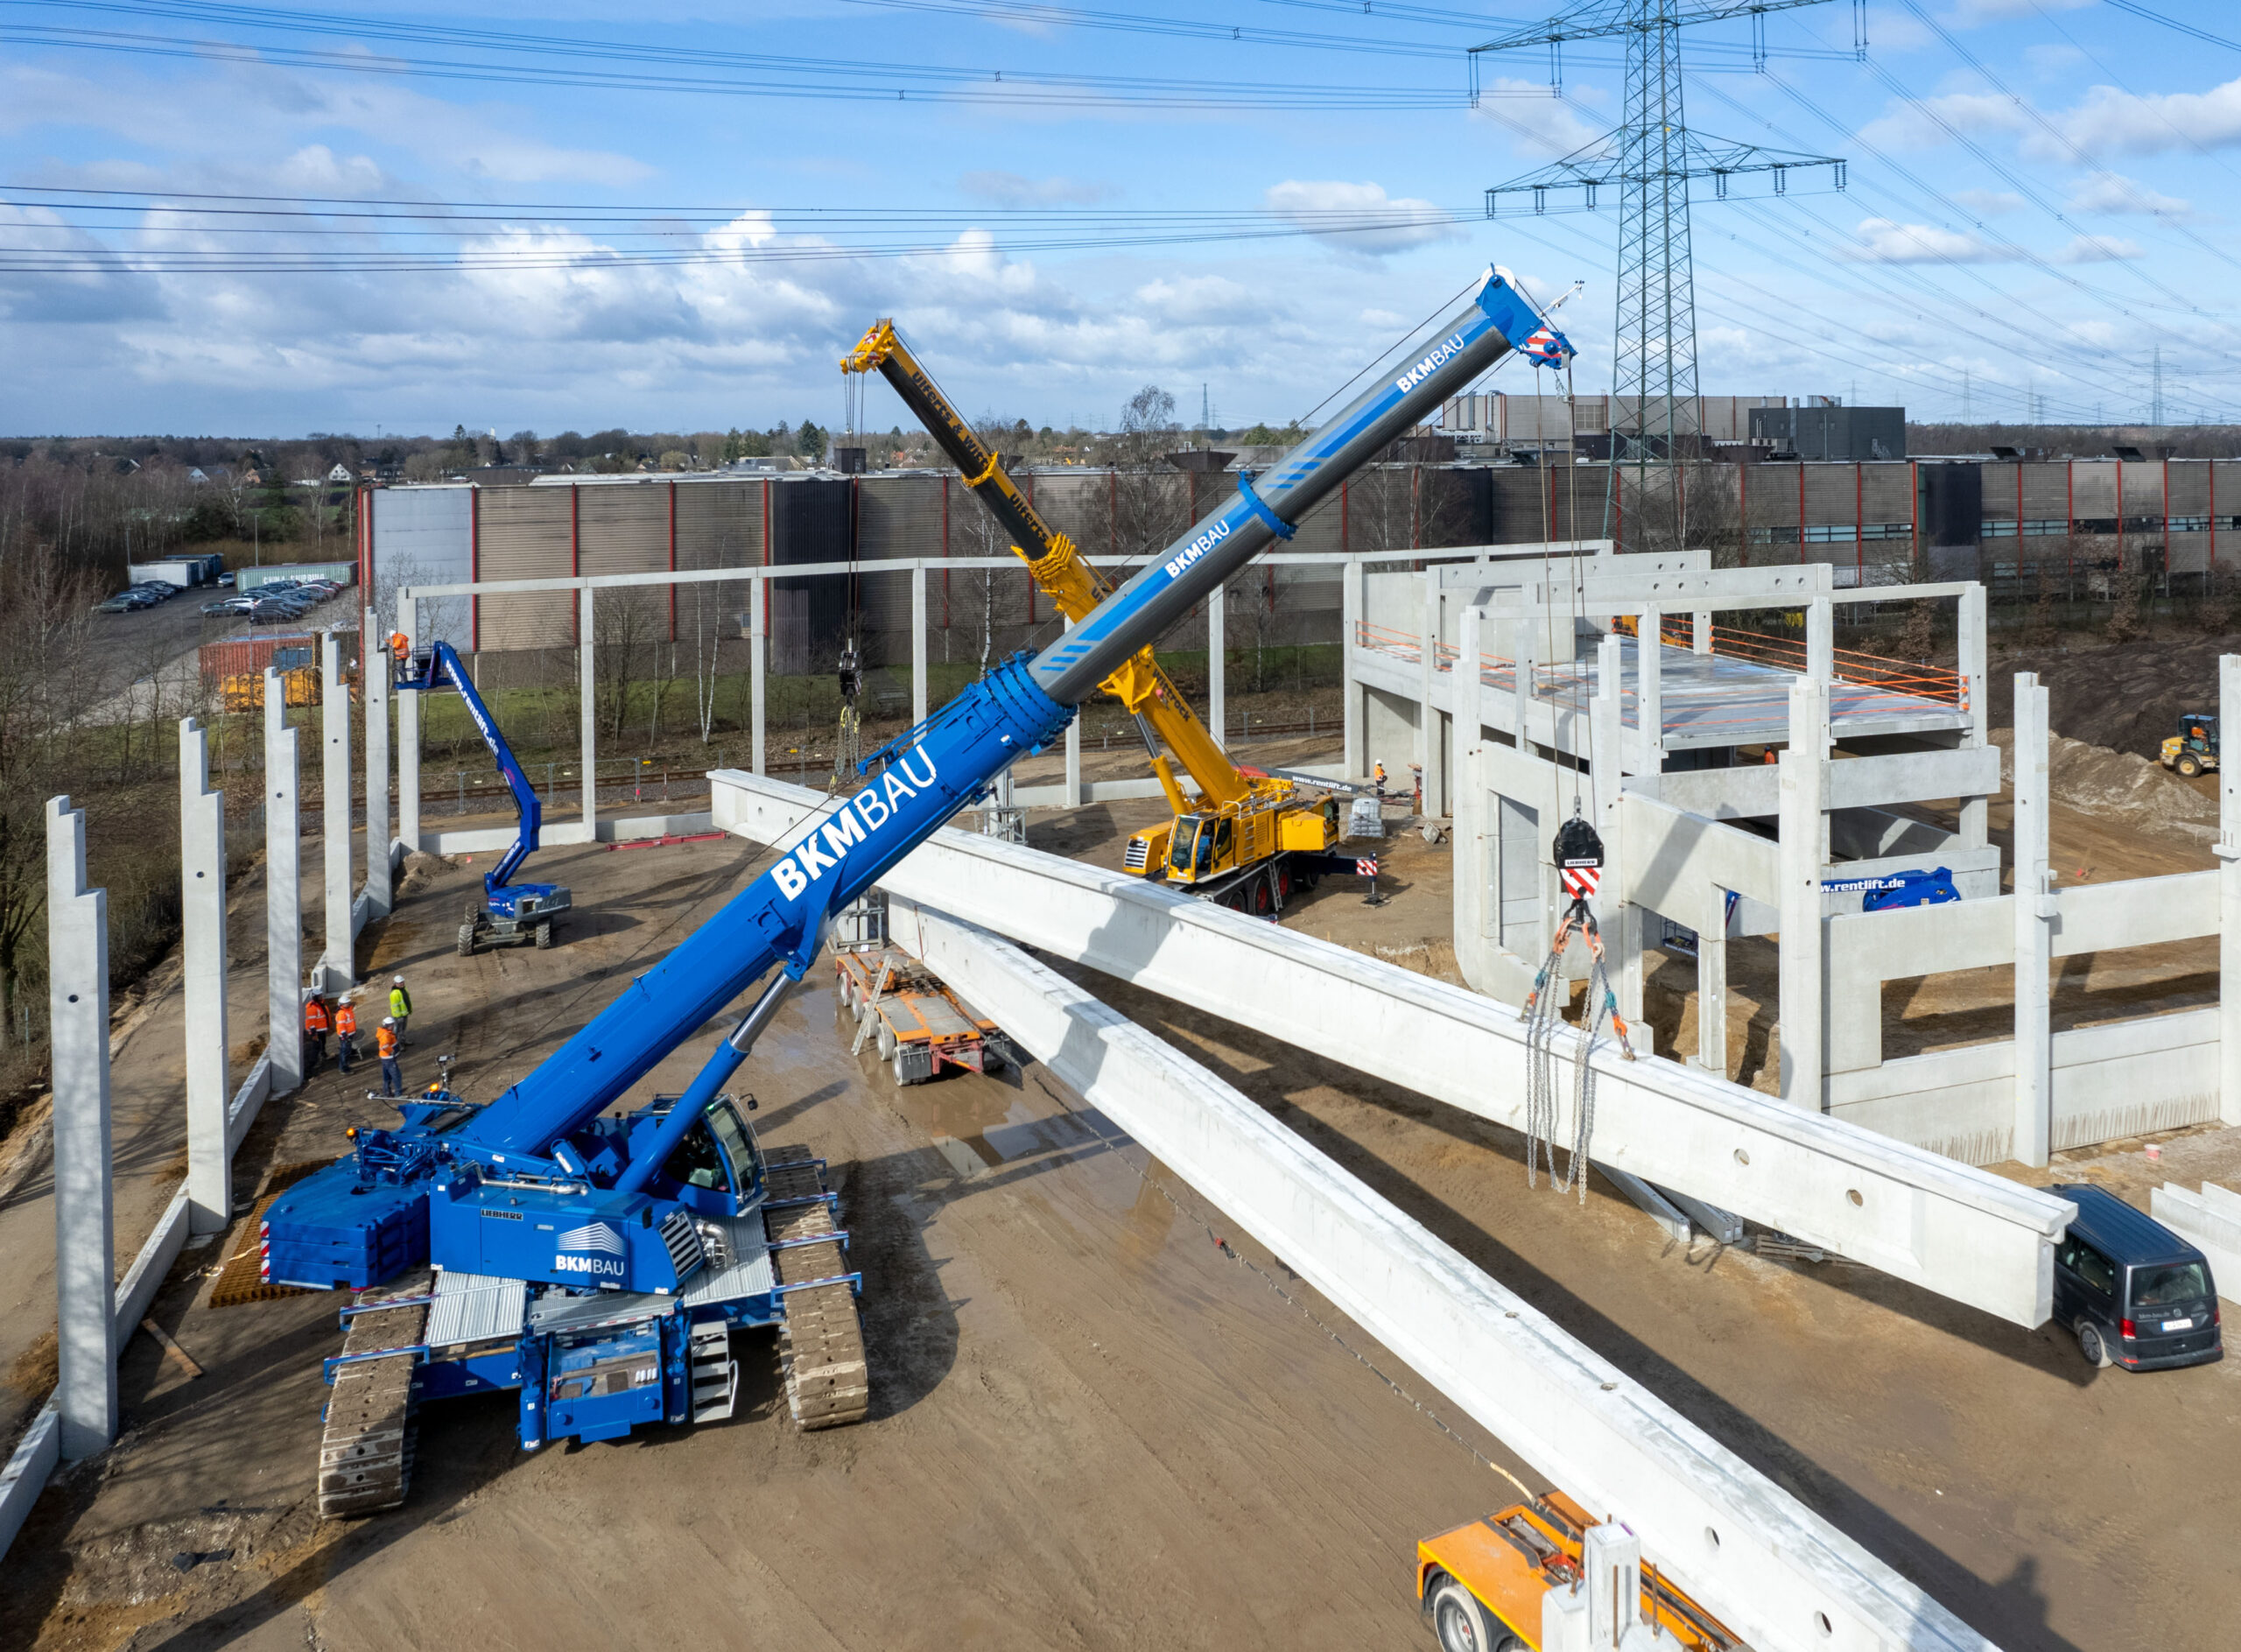 Clever solution: together with a LTM 1130-5.1 mobile crane operated by the heavy-duty and crane logistics company Ulferts & Wittrock, a 40-tonne ceiling truss is installed. The crawler crane was tasked with moving the load.